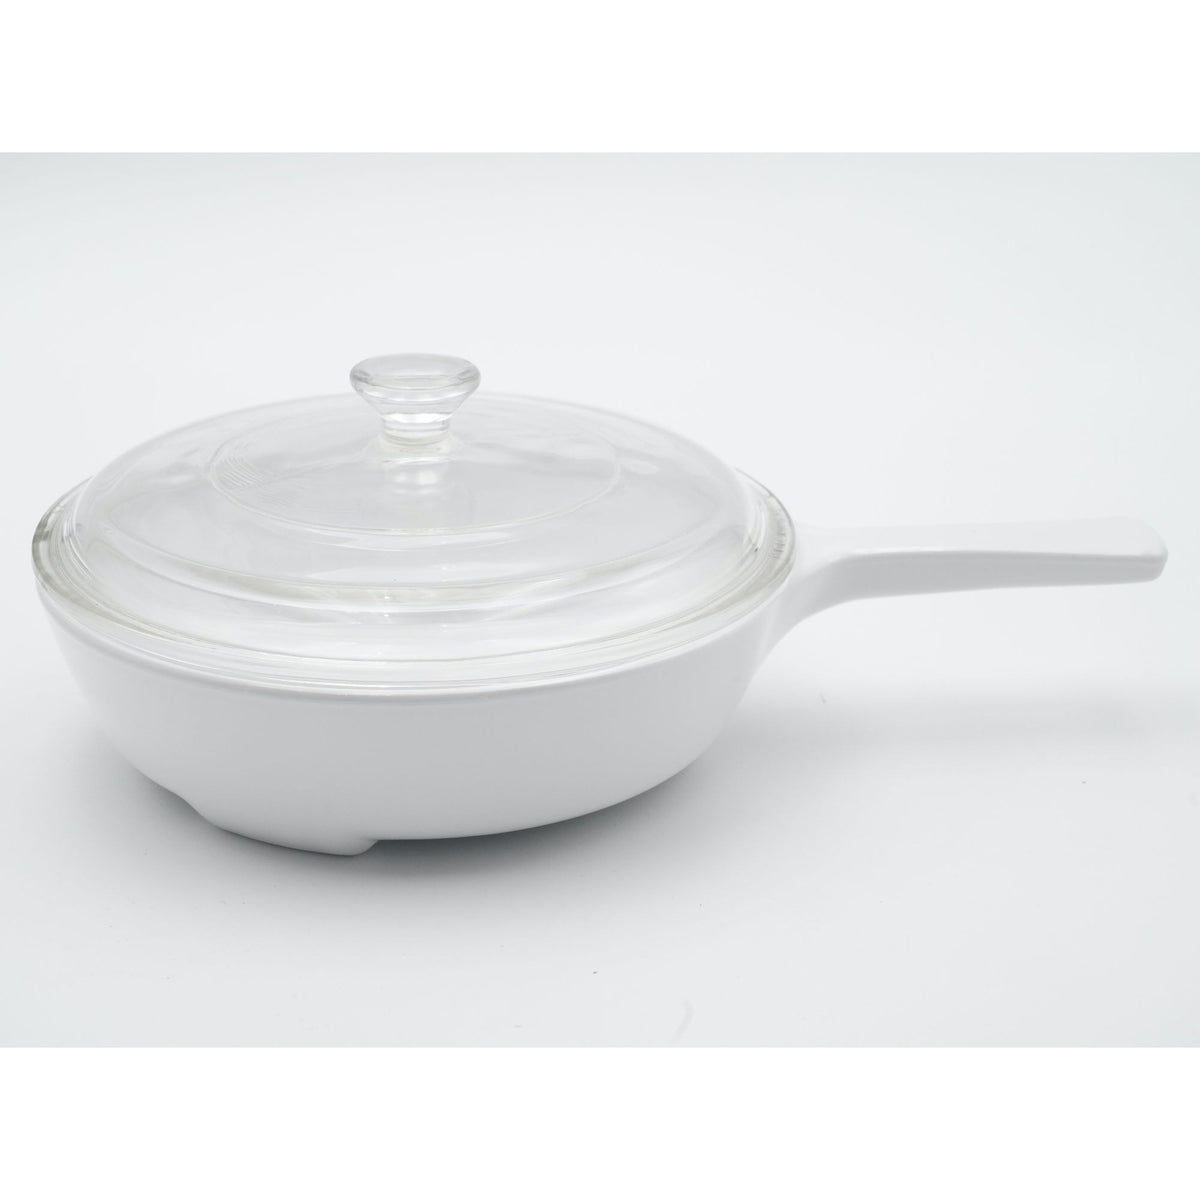 Corning Ware MW-83-B White Coupe Microwave Menuette Pan with Lid 6.75"